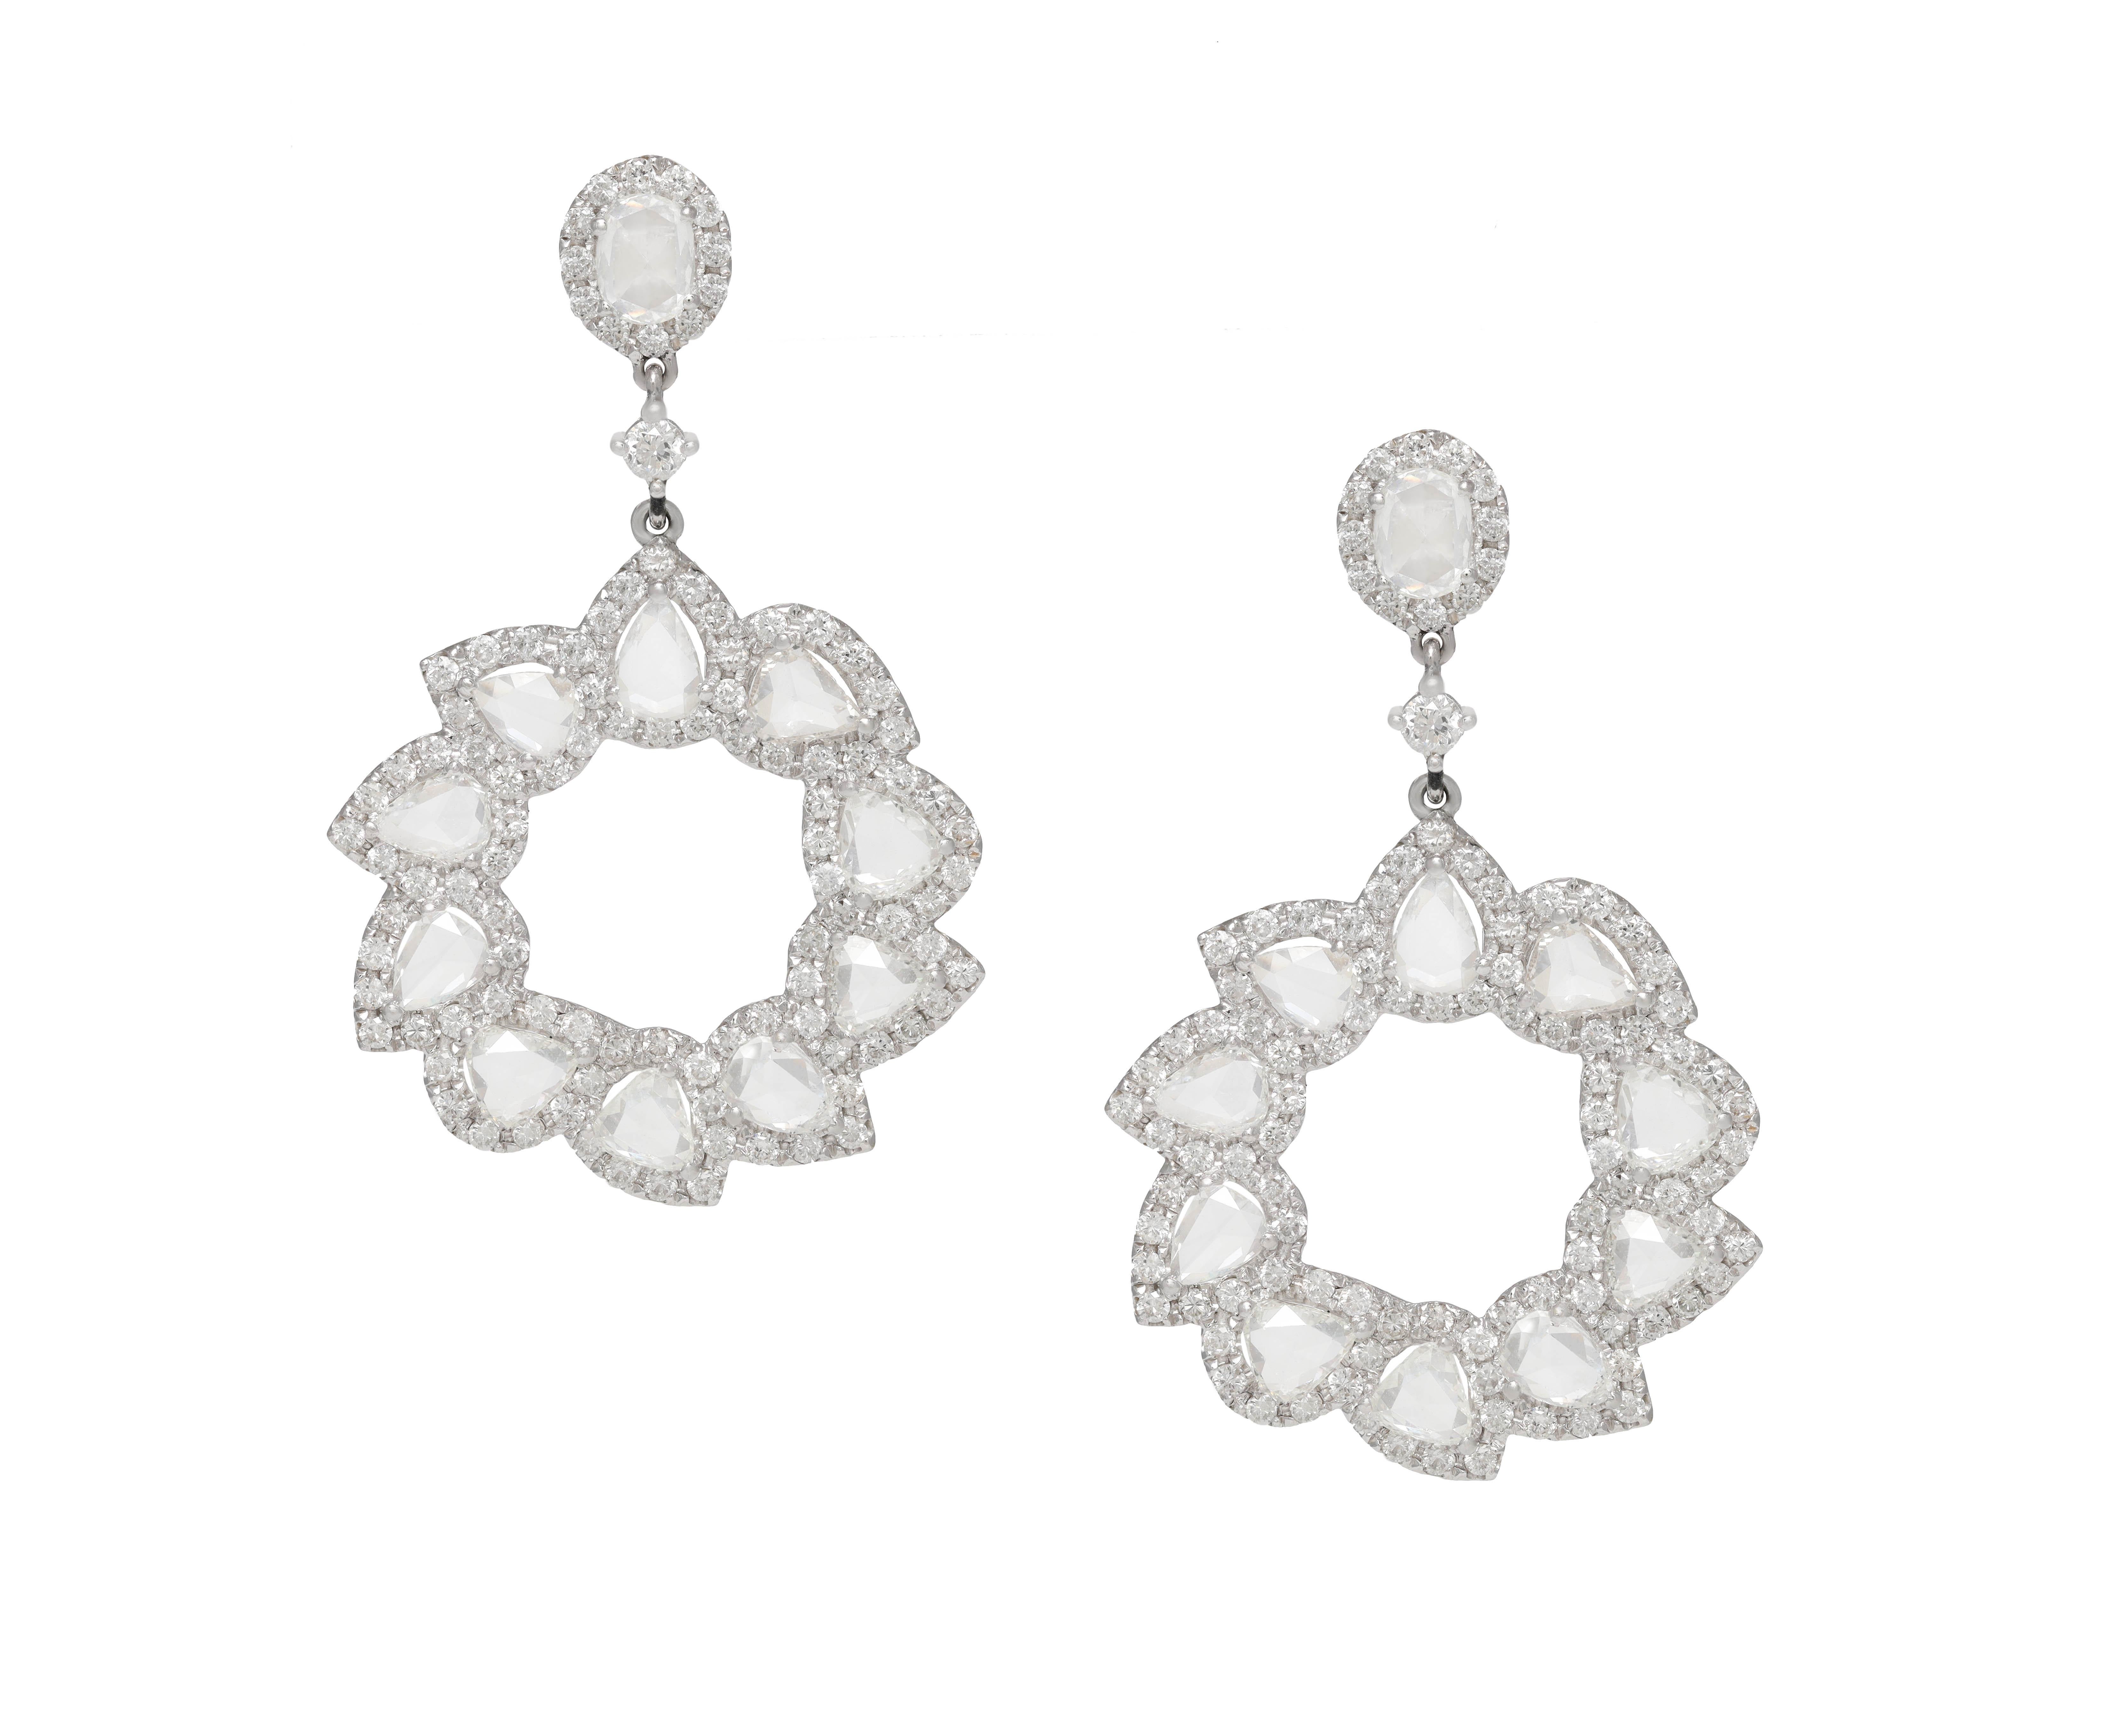 18 kt white gold diamond fashion earrings adorned with rose cut diamonds surrounded by round diamonds in a flower shape totaling 4.59 cts of diamonds.
Diana M. is a leading supplier of top-quality fine jewelry for over 35 years.
Diana M is one-stop